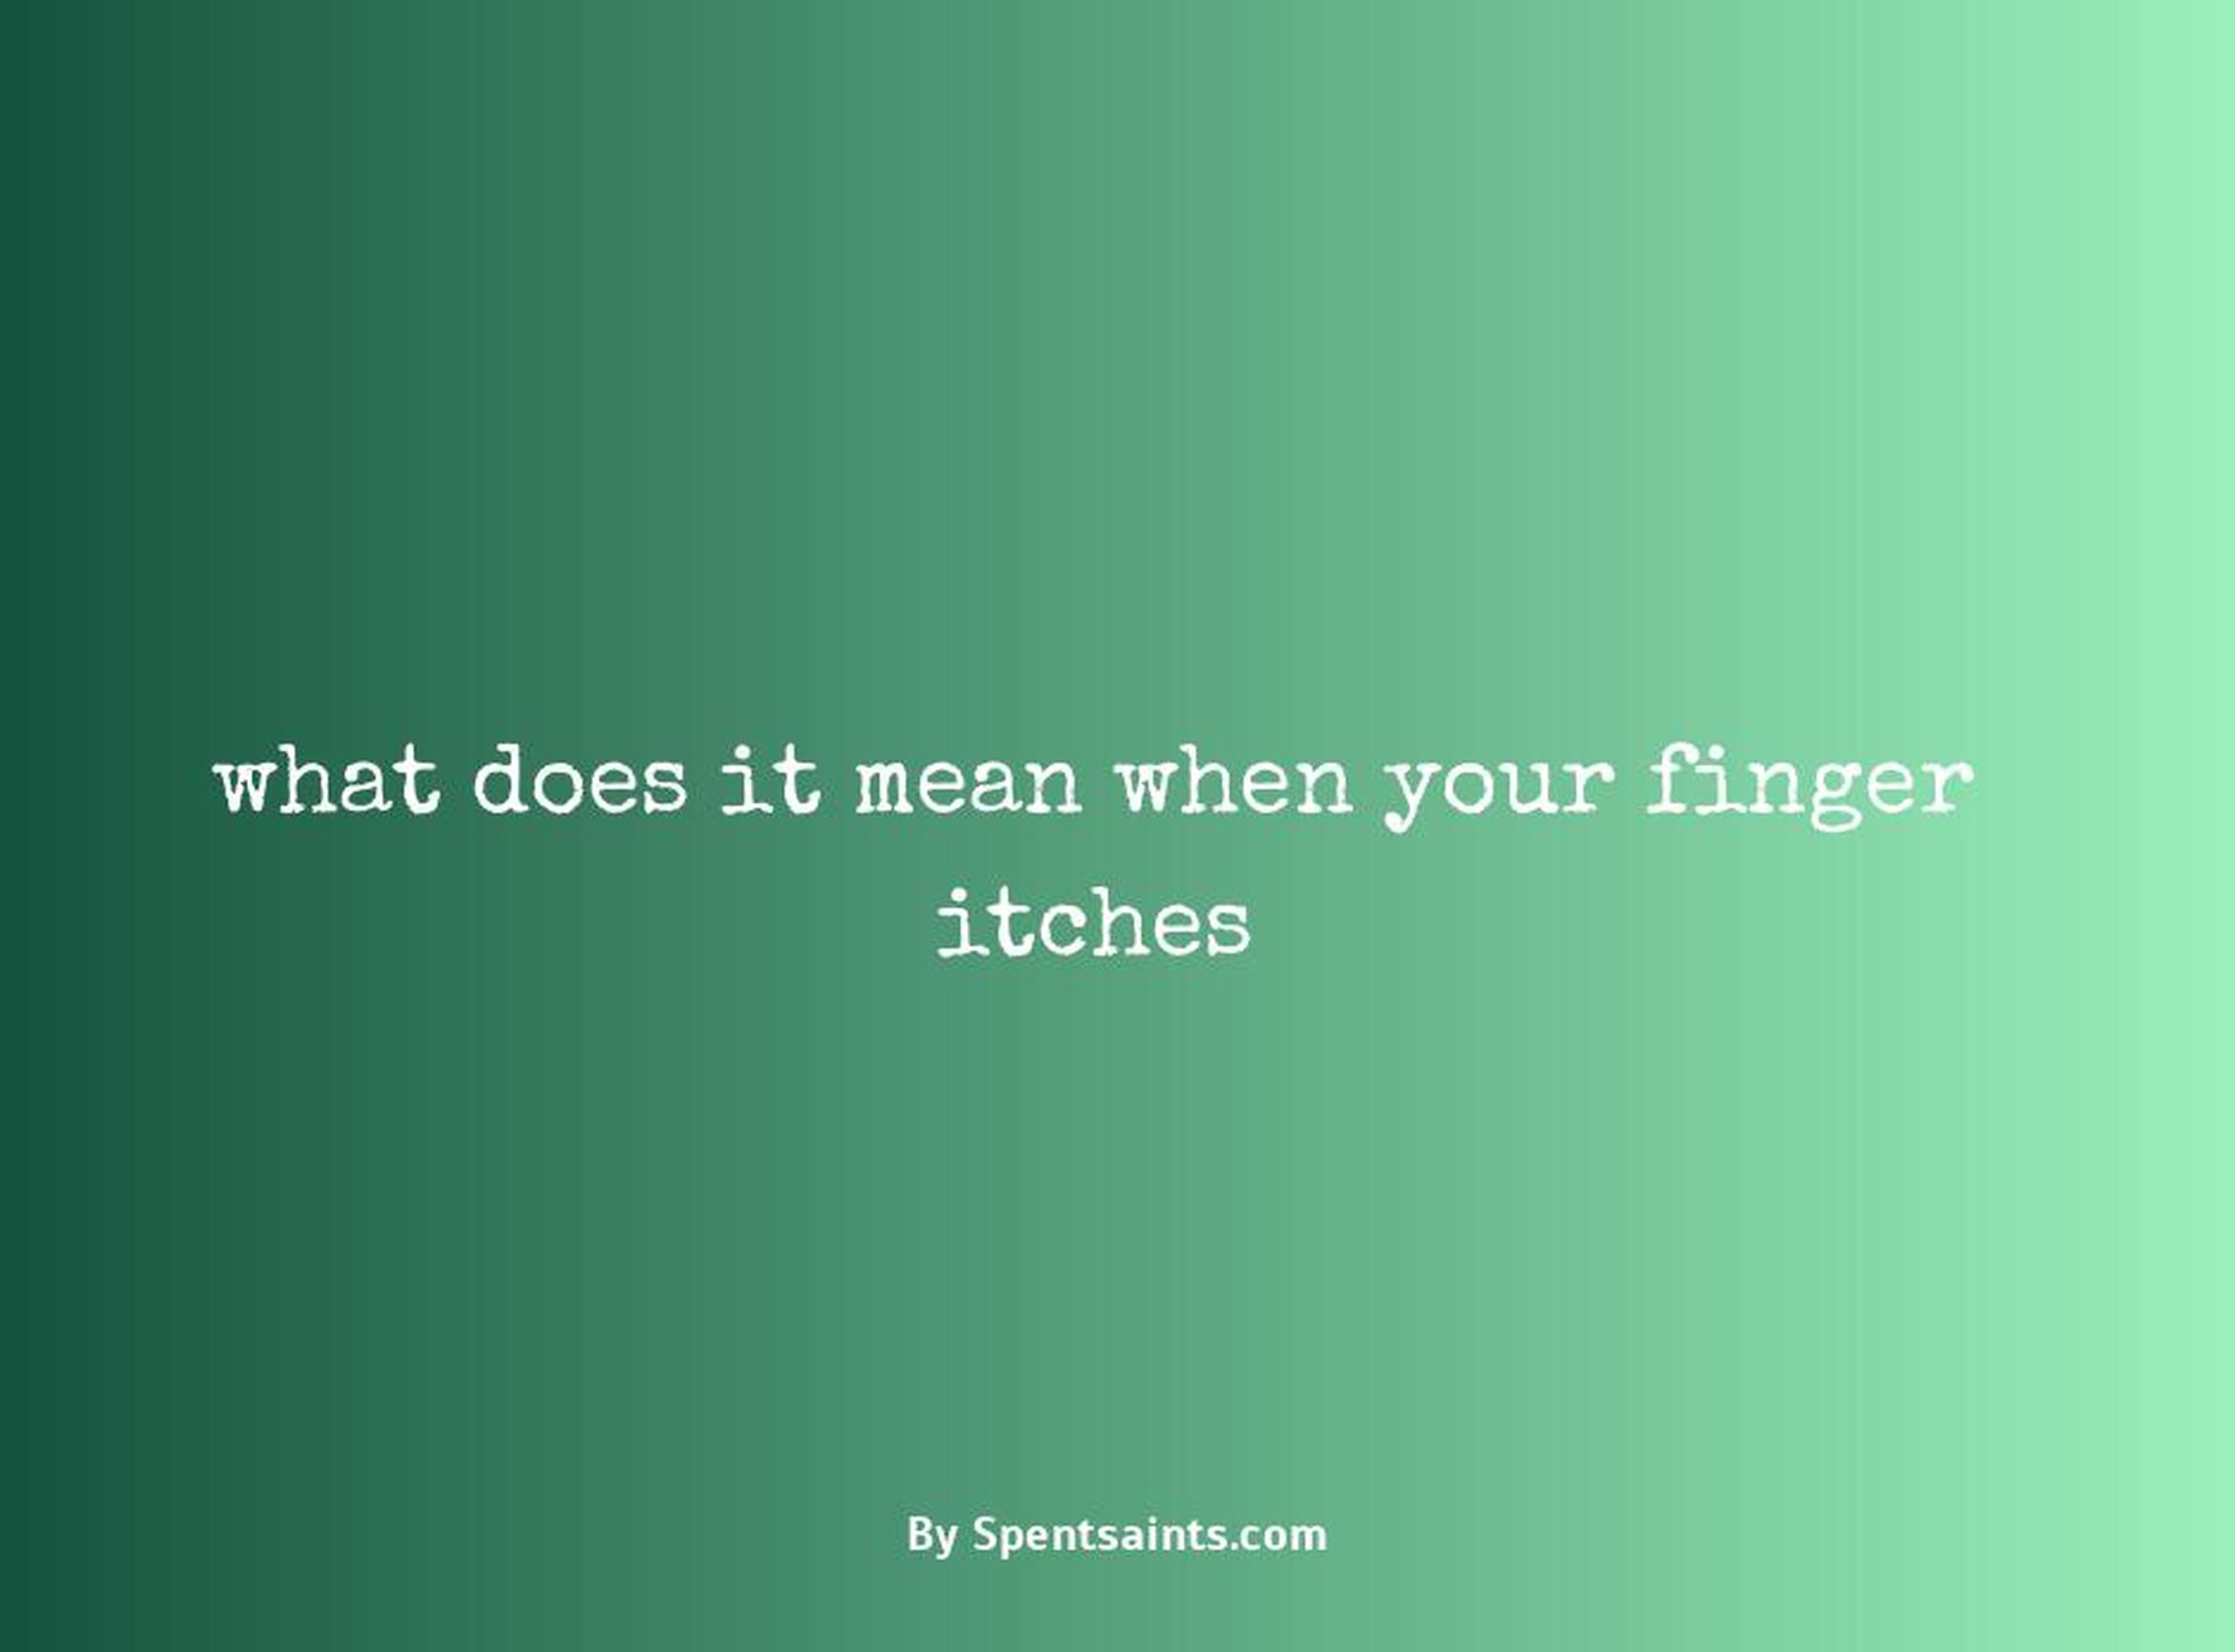 what does it mean when your finger itches